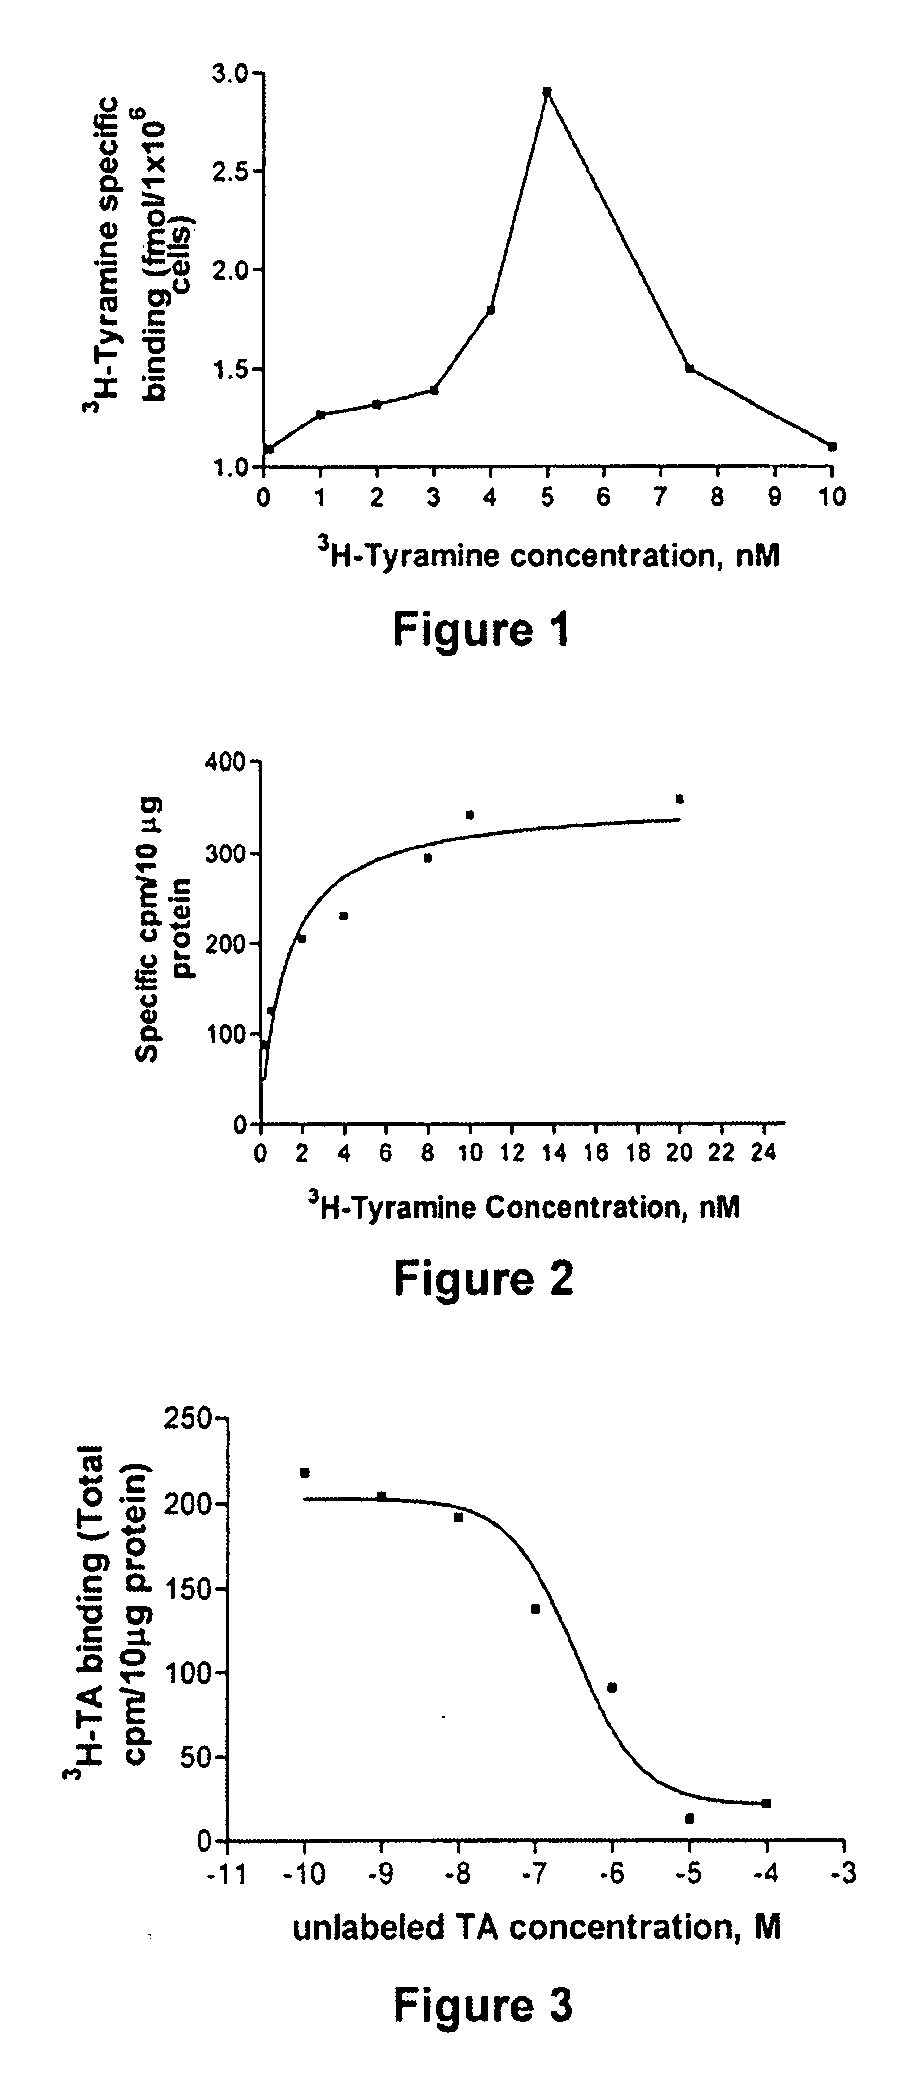 Compositions and Methods for Controlling Insects